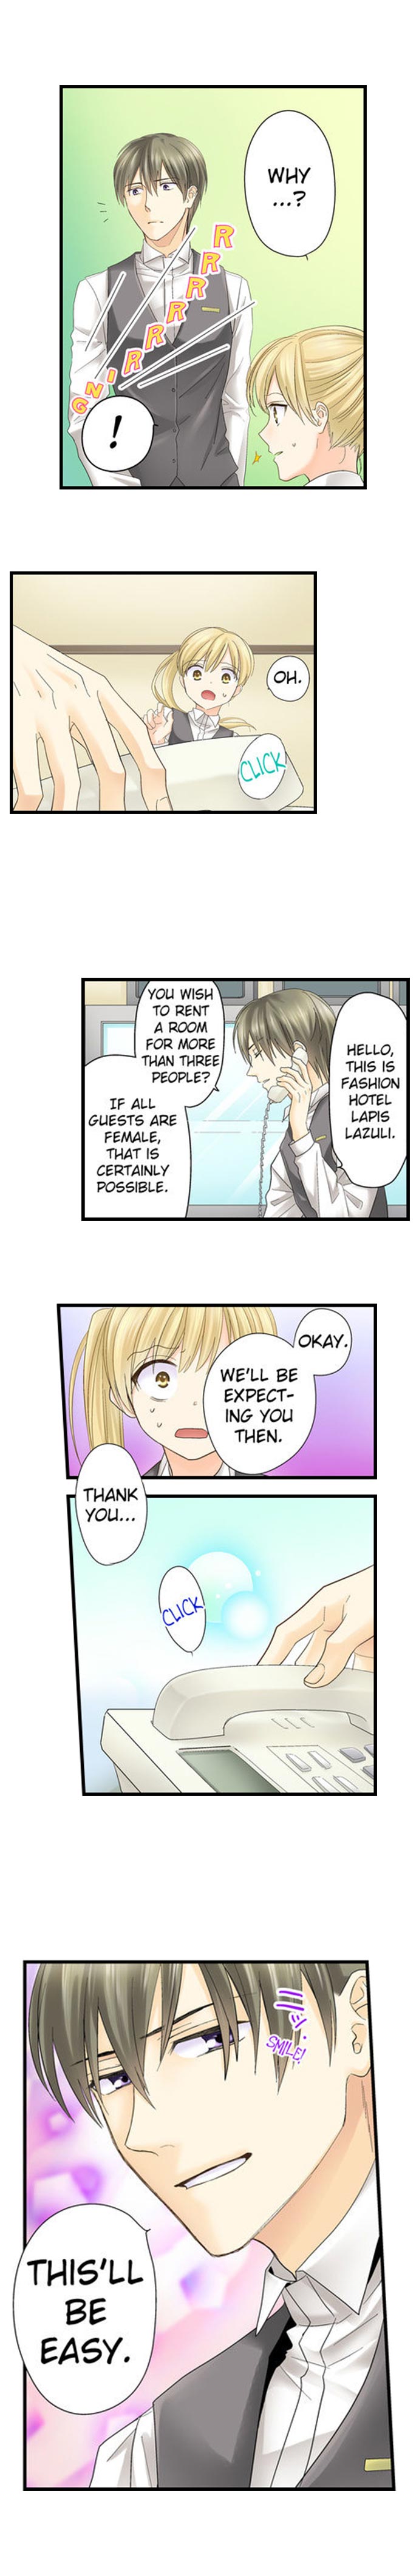 Running a Love Hotel with My Math Teacher - Chapter 9 Page 10